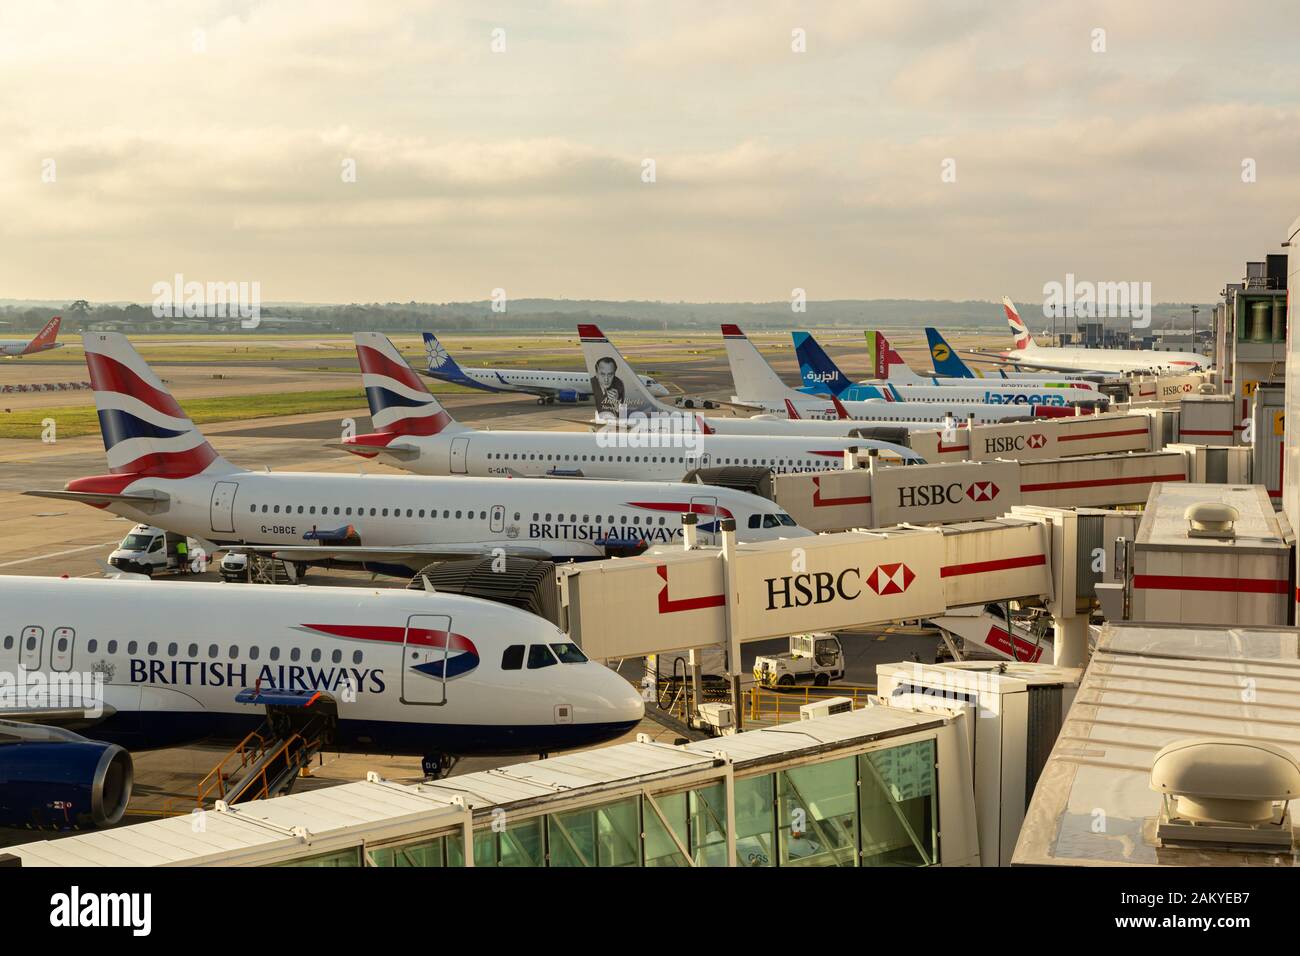 LONDON GATWICK AIRPORT, UK - December 29, 2019: British Airways jet at Gatwick airport with other airliners in the background Stock Photo